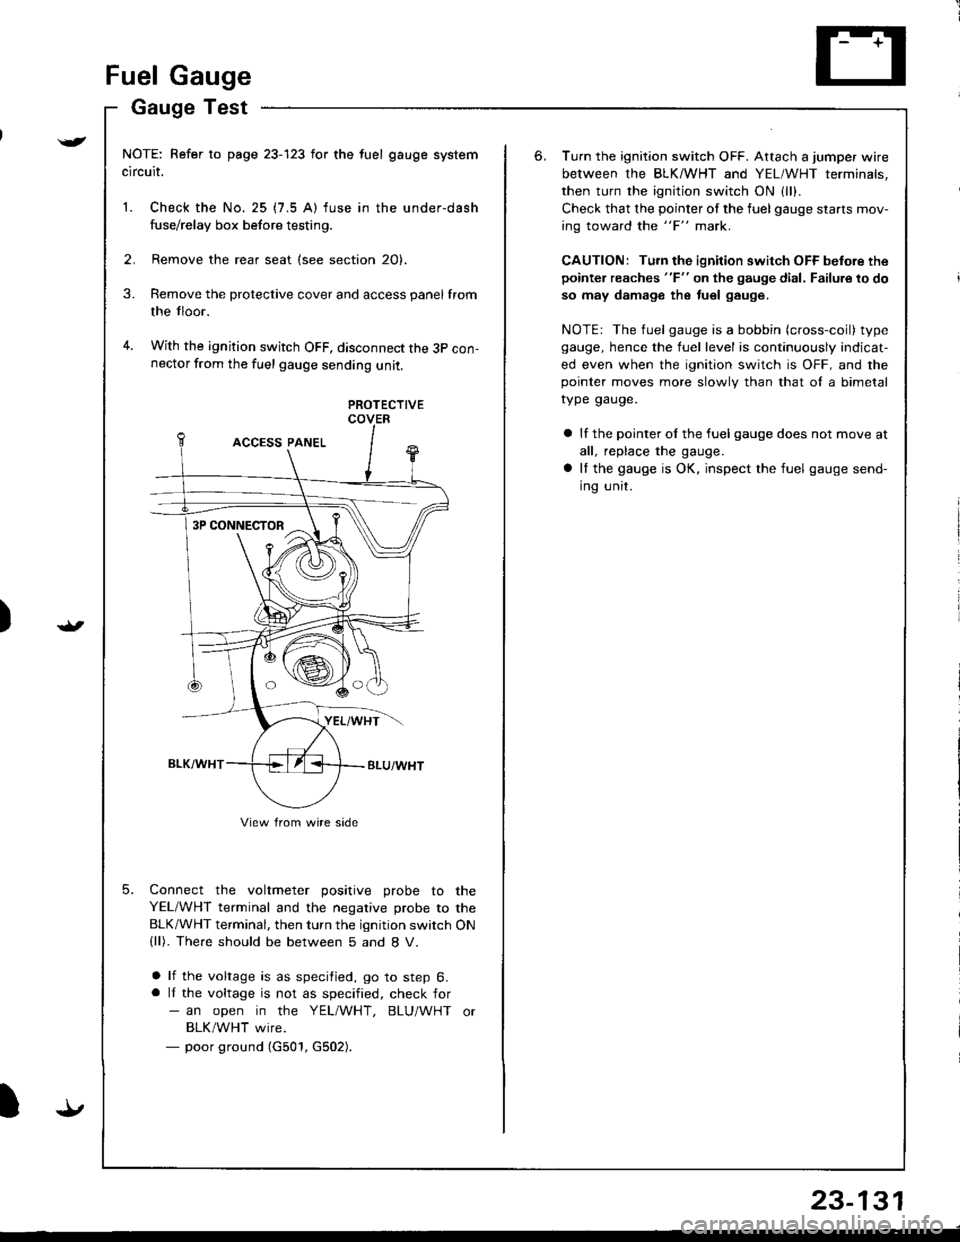 HONDA INTEGRA 1998 4.G User Guide )
{
t.t
t.!
23-131
Fuel Gauge
Gauge Test
NOTE: Refer to page 23-123 for the fuel gauge system
circuit.
1. Check the No. 25 (7.5 A) fuse in the under-dash
fuse/relay box before testing.
2. Remove the r